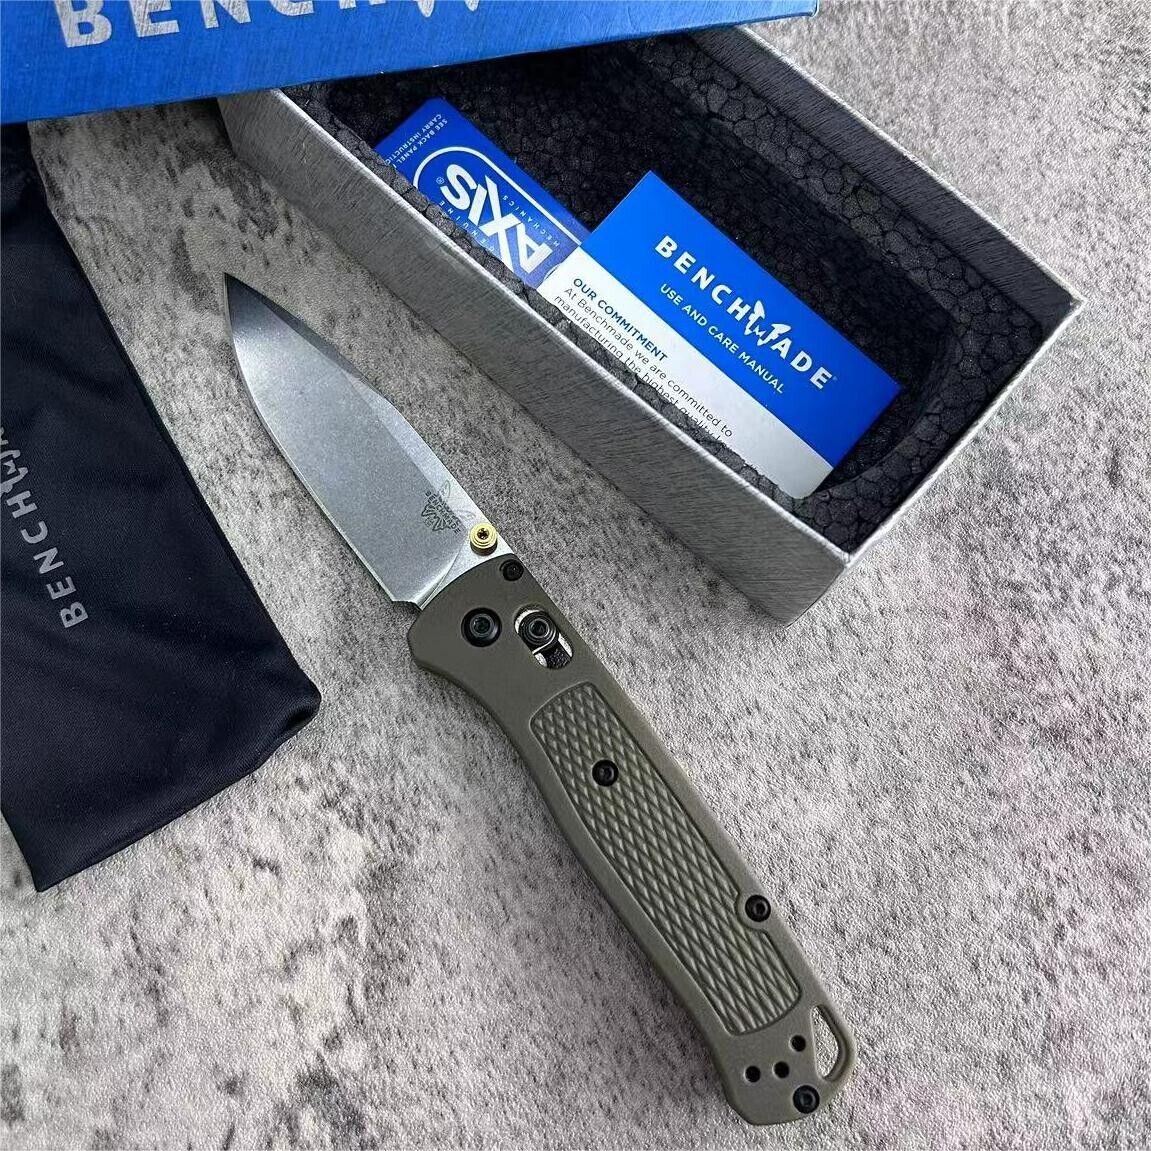 535 Bugout AXIS Lock S30V Blade Green Grivory Handle Folding Knife BENCHMADE New